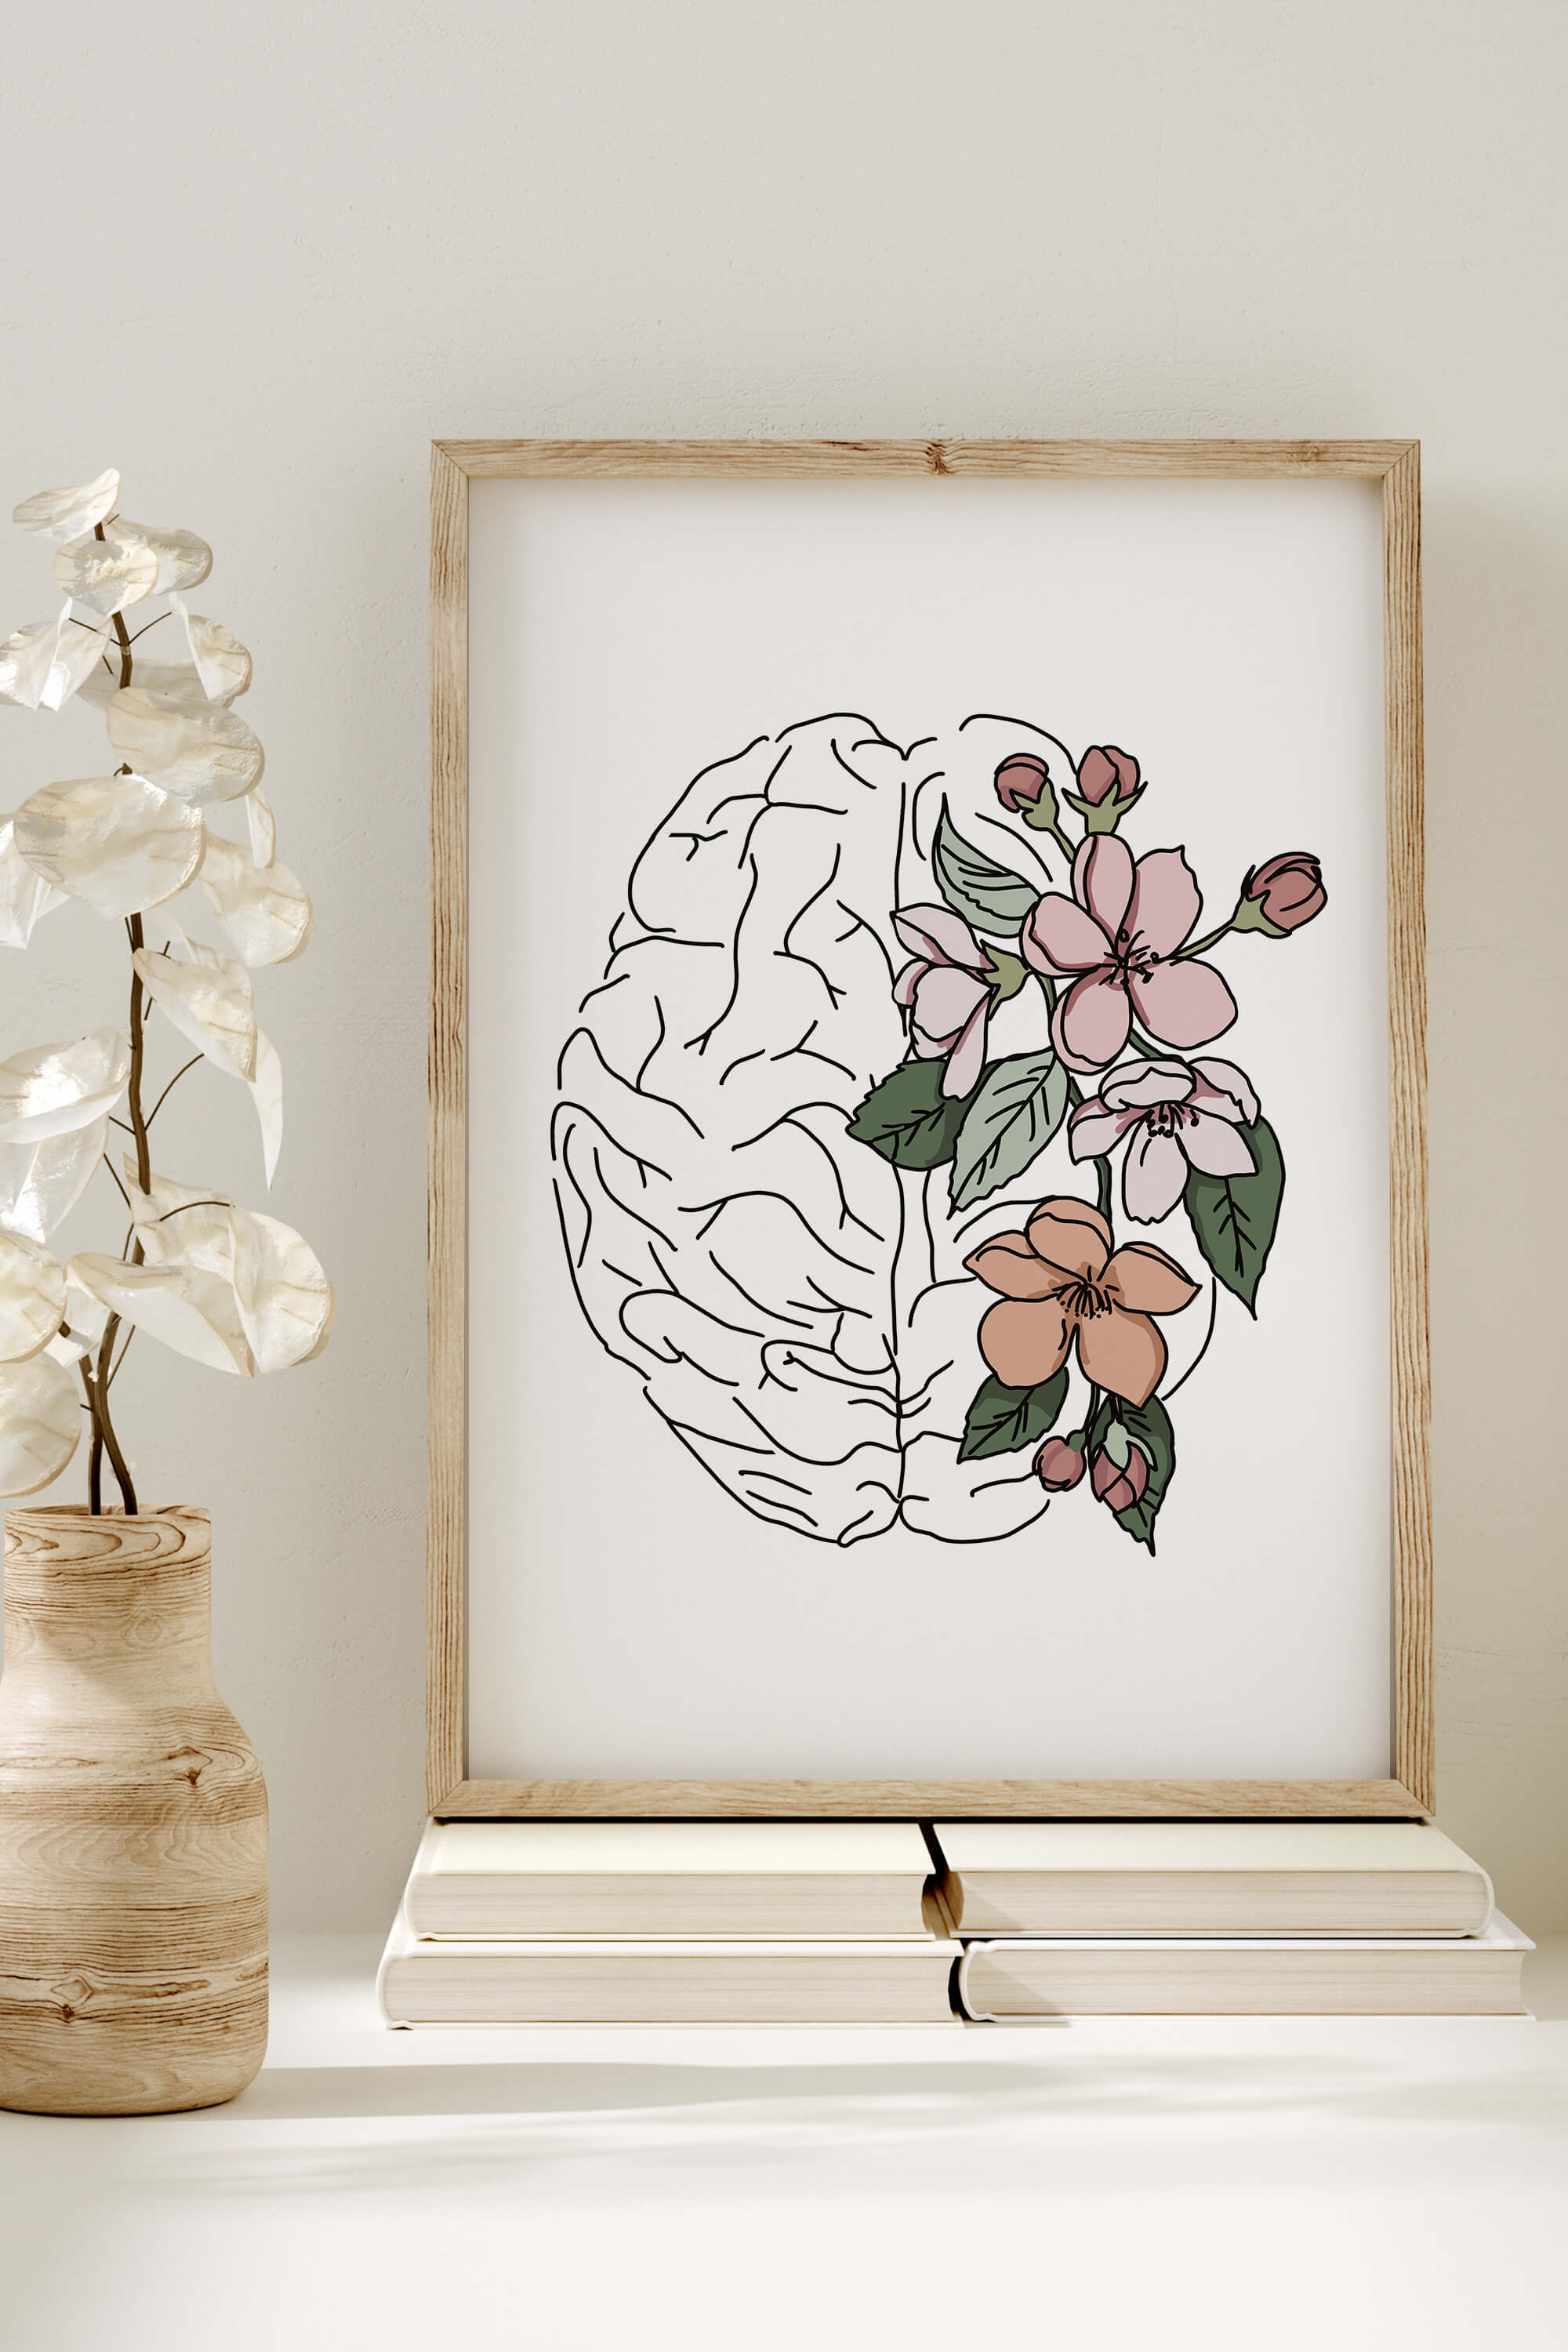 Abstract Brain Art with vibrant floral patterns, ideal for enhancing modern medical office decor.